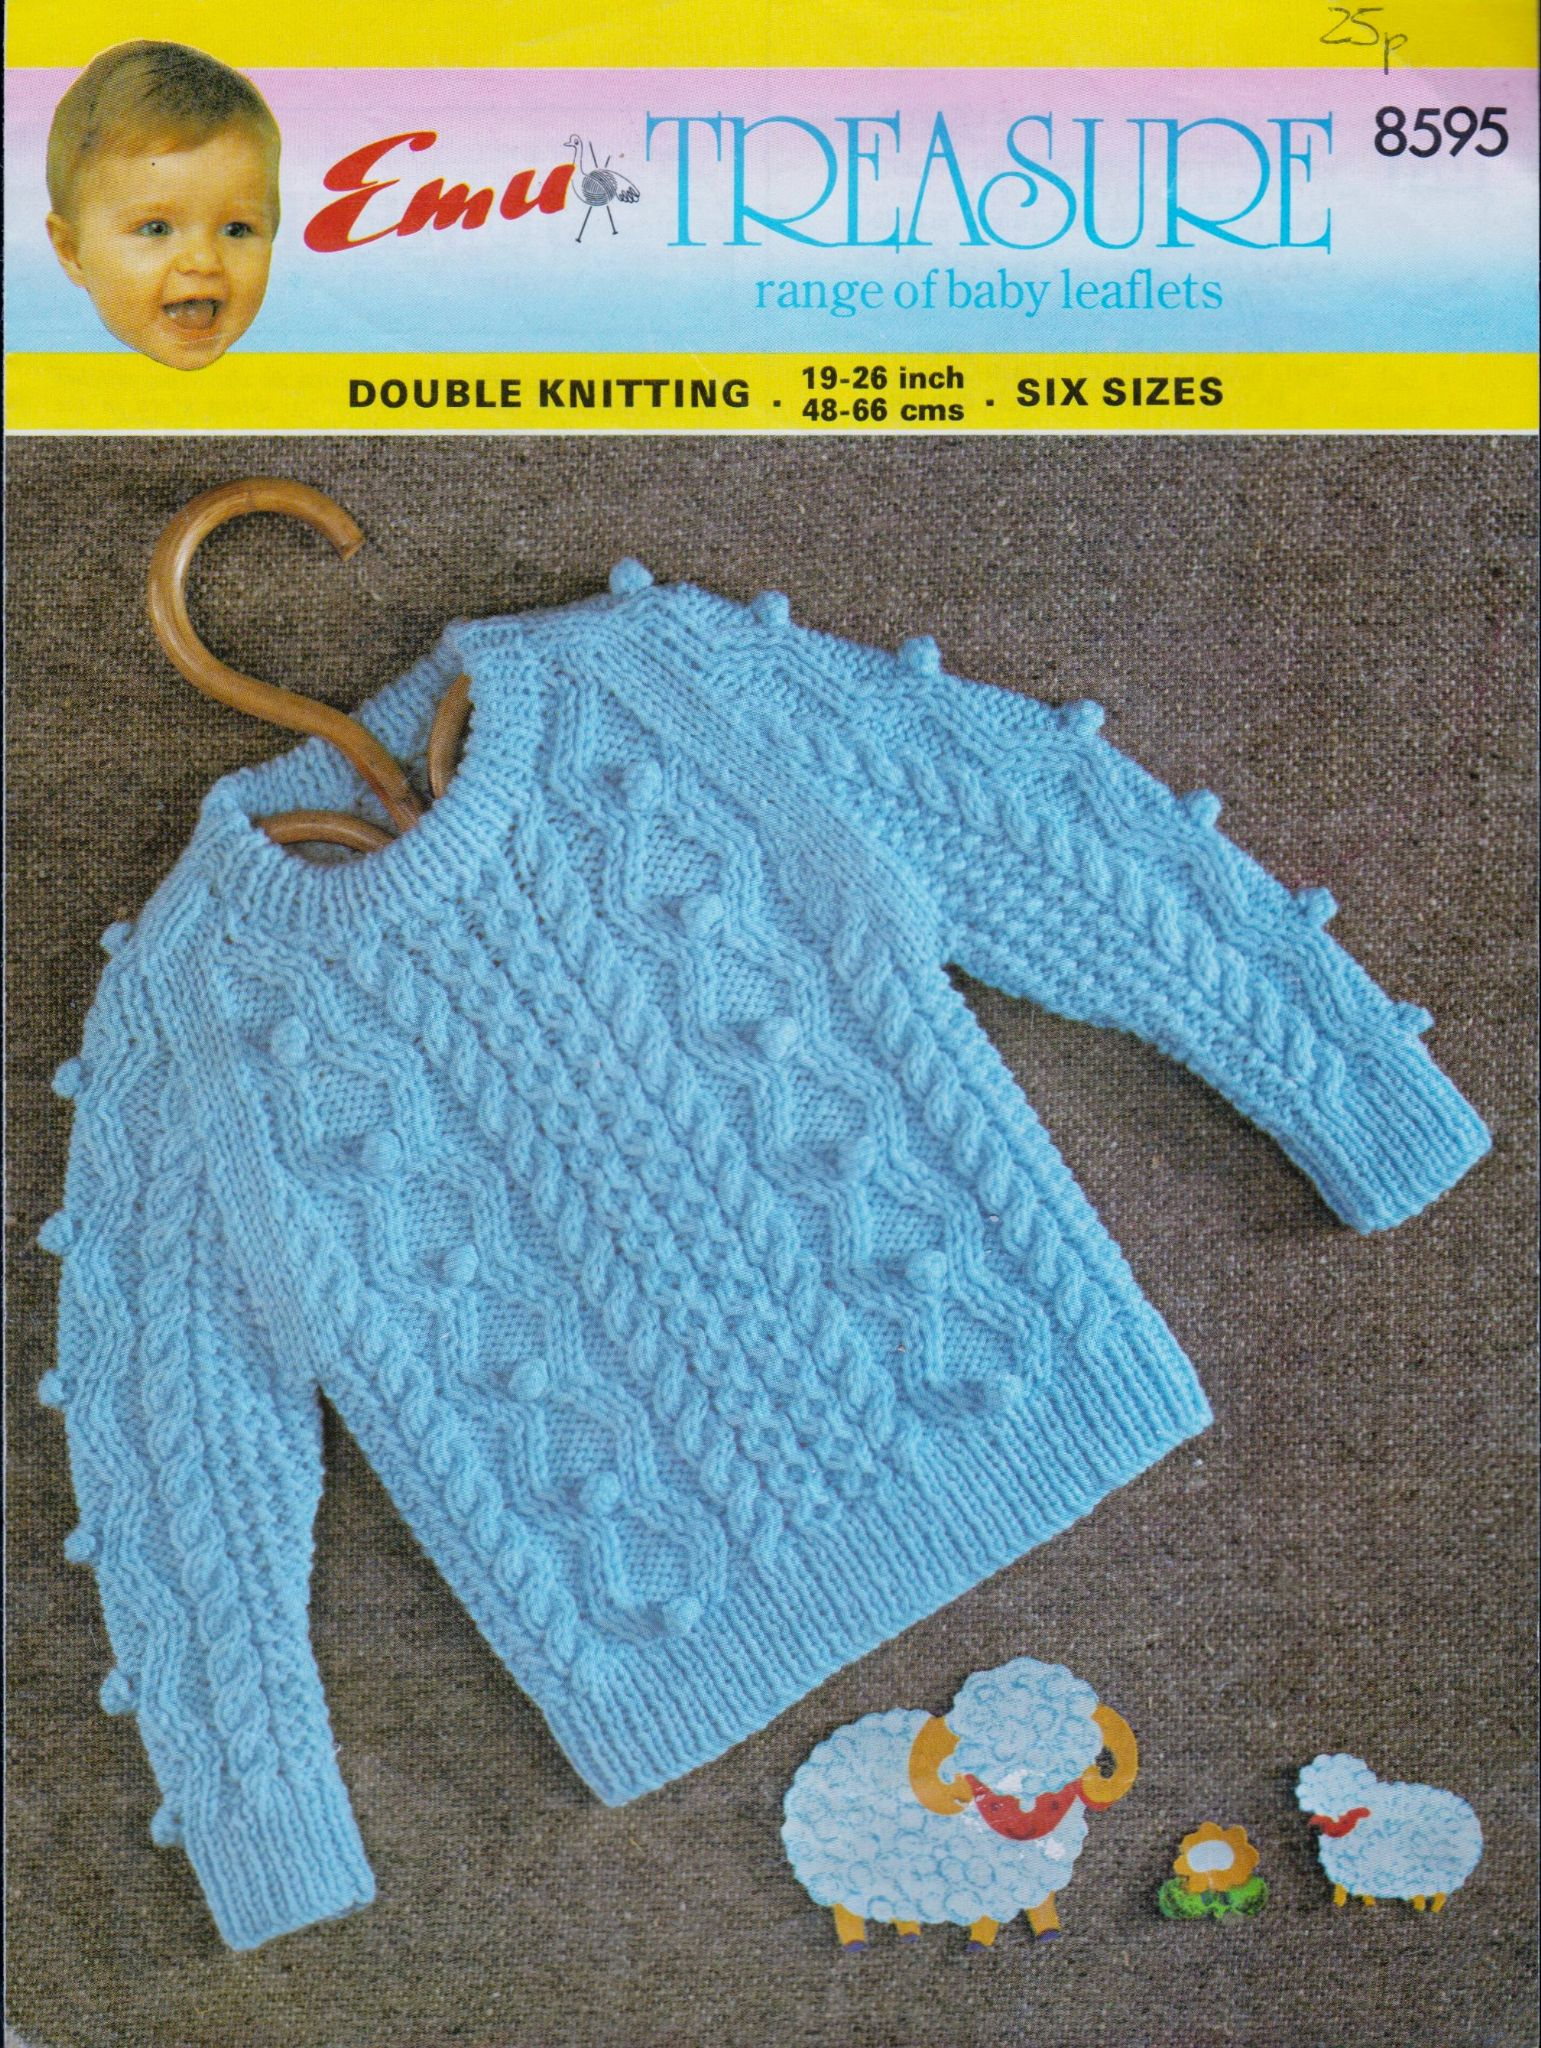 Double Knitting Baby Patterns Pdf Knitting Pattern Emu 8595 Ba Childs Cable Sweater In Double Knitting Chest 19 26